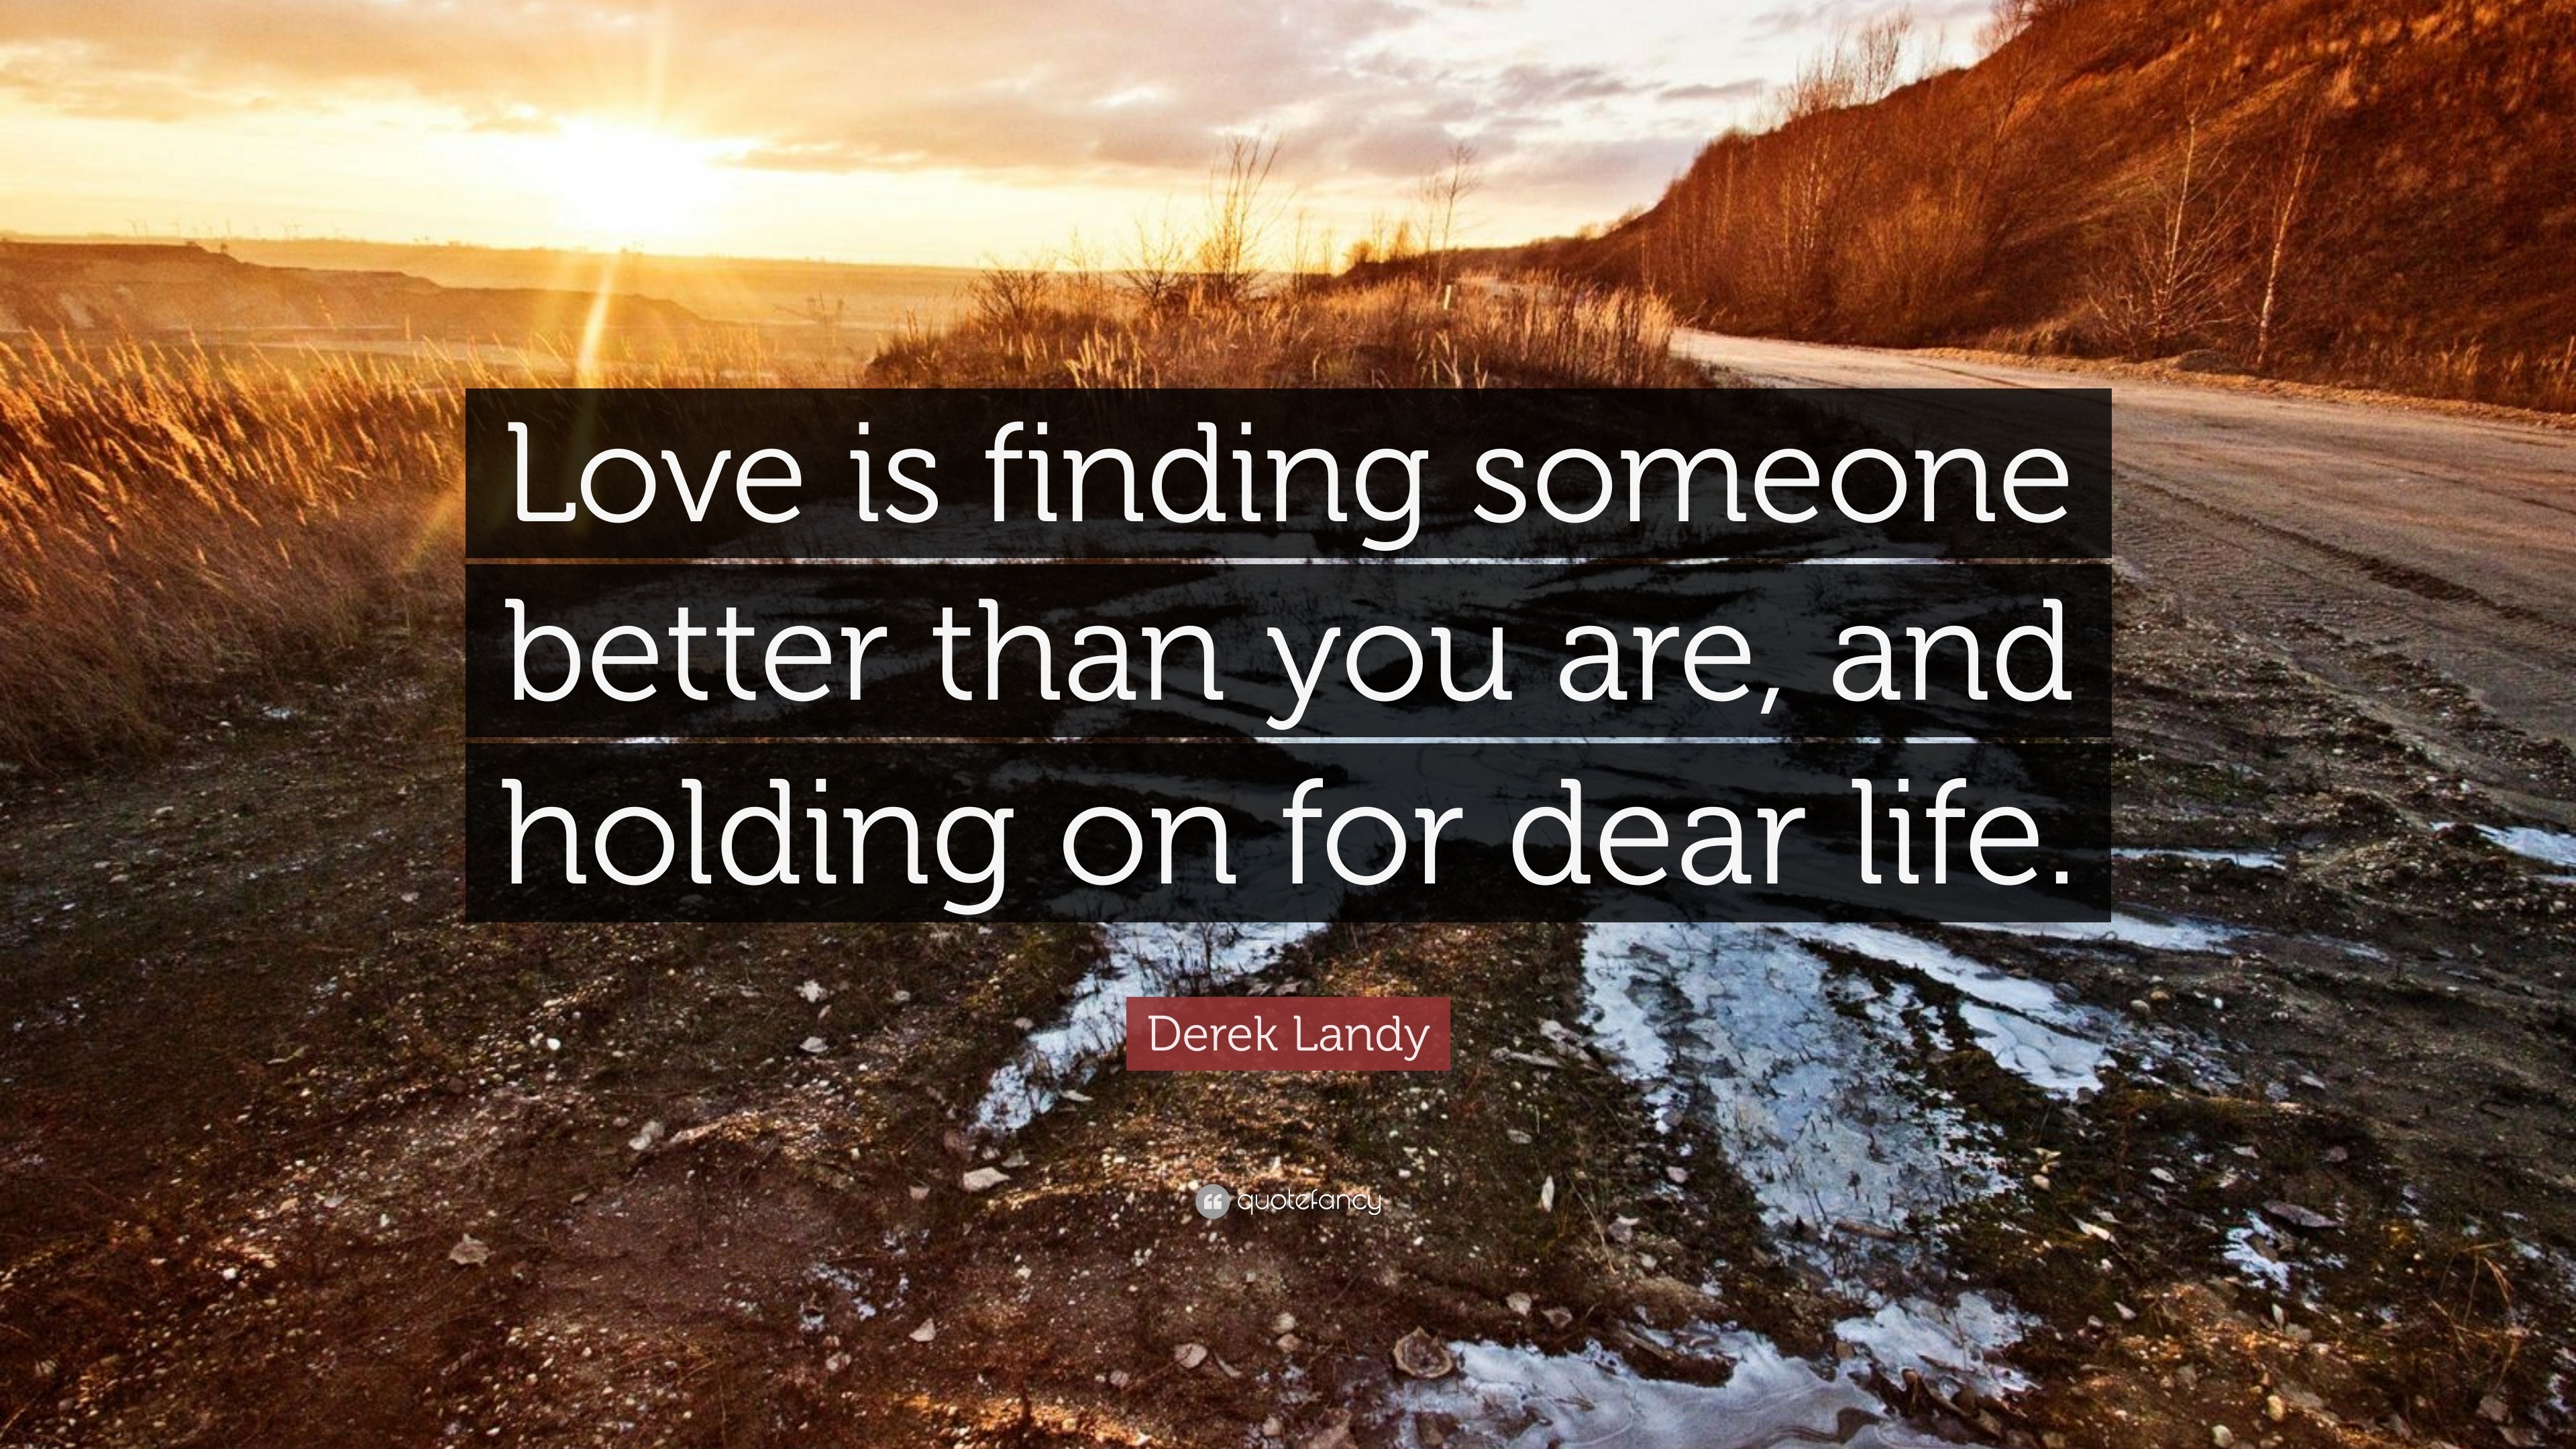 Derek Landy Quote: “Love is finding someone better than you are, and ...